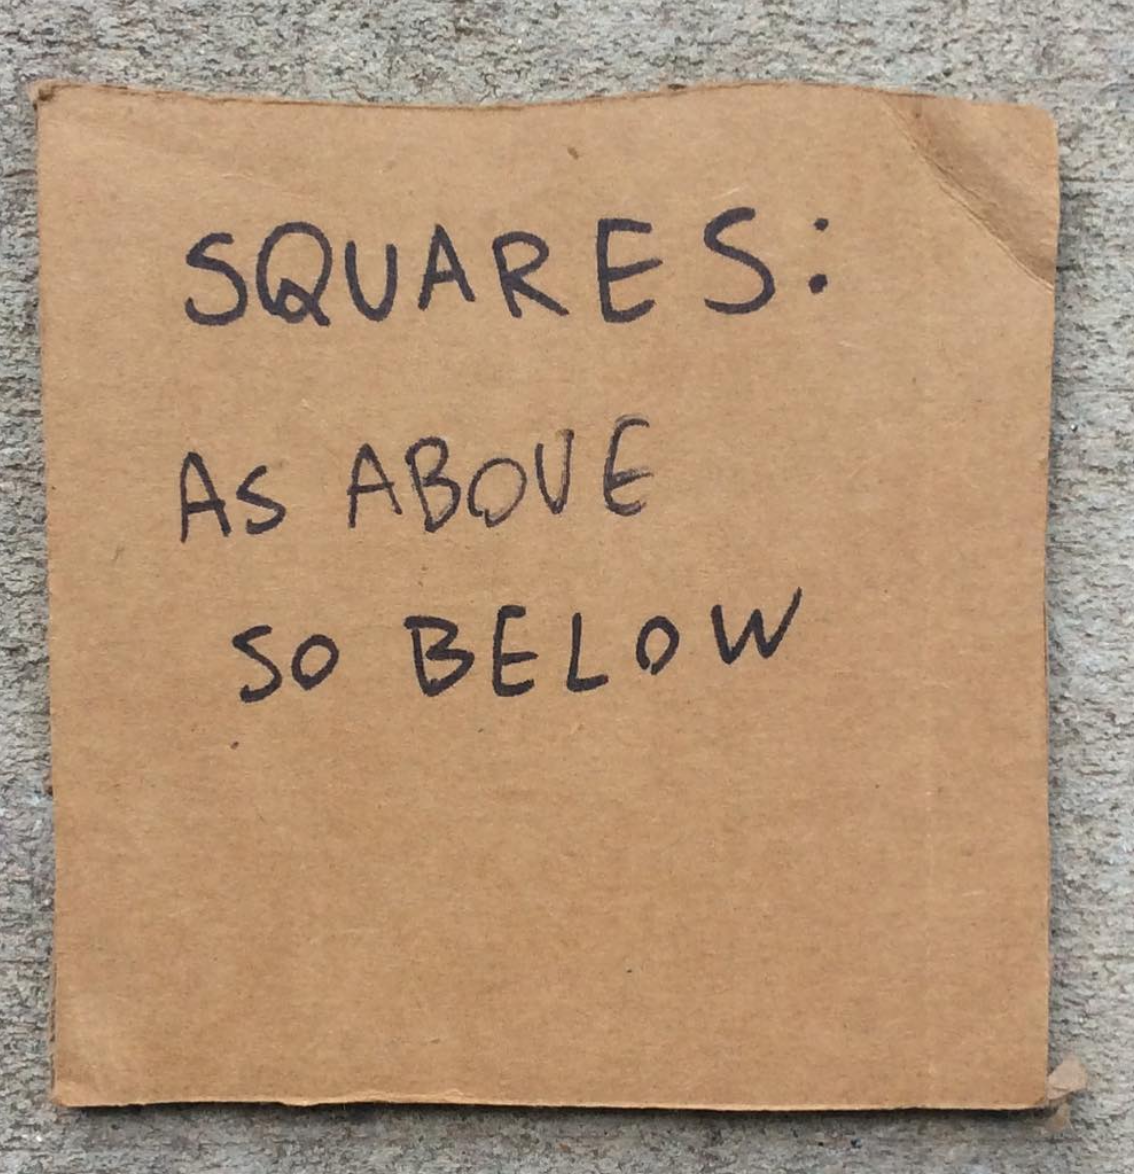 image of cardboard square which reads "as above, so below"